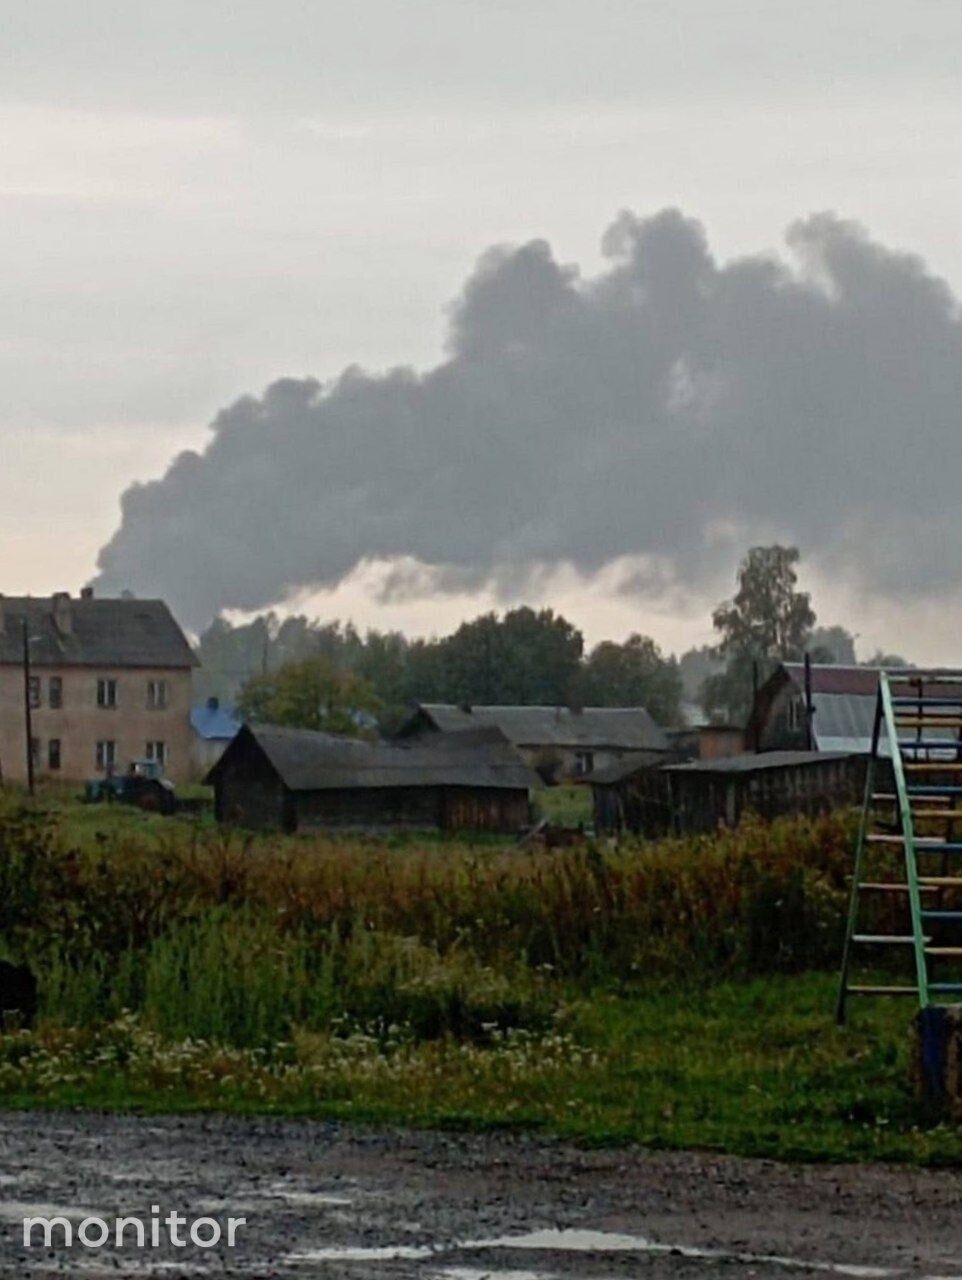 A drone hit an airfield in Novgorod region, Russia: a fire broke out. Photo